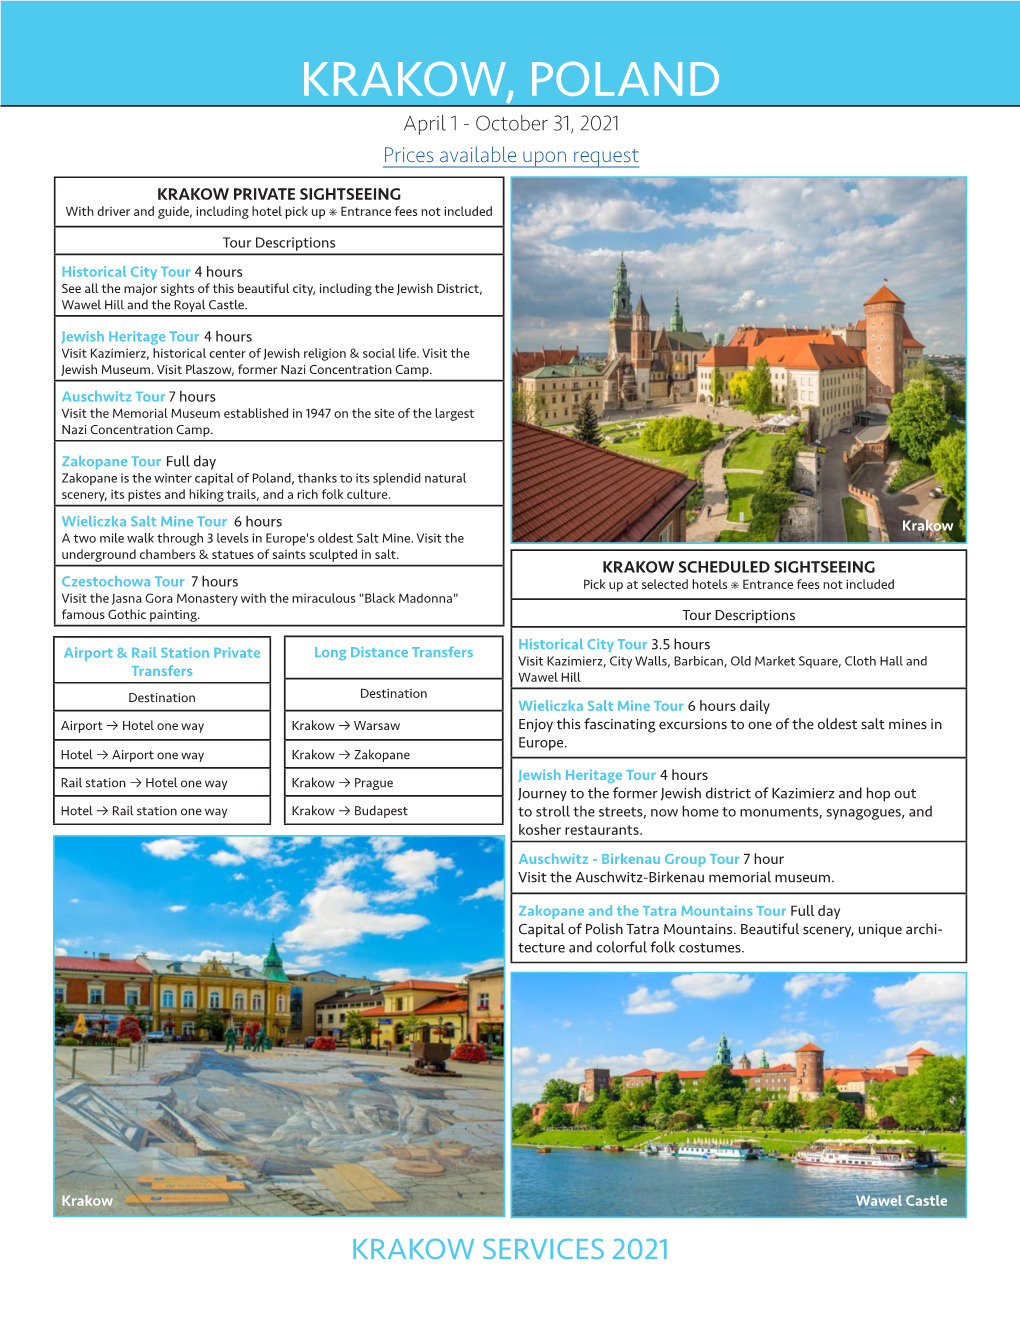 KRAKOW, POLAND April 1 - October 31, 2021 Prices Available Upon Request